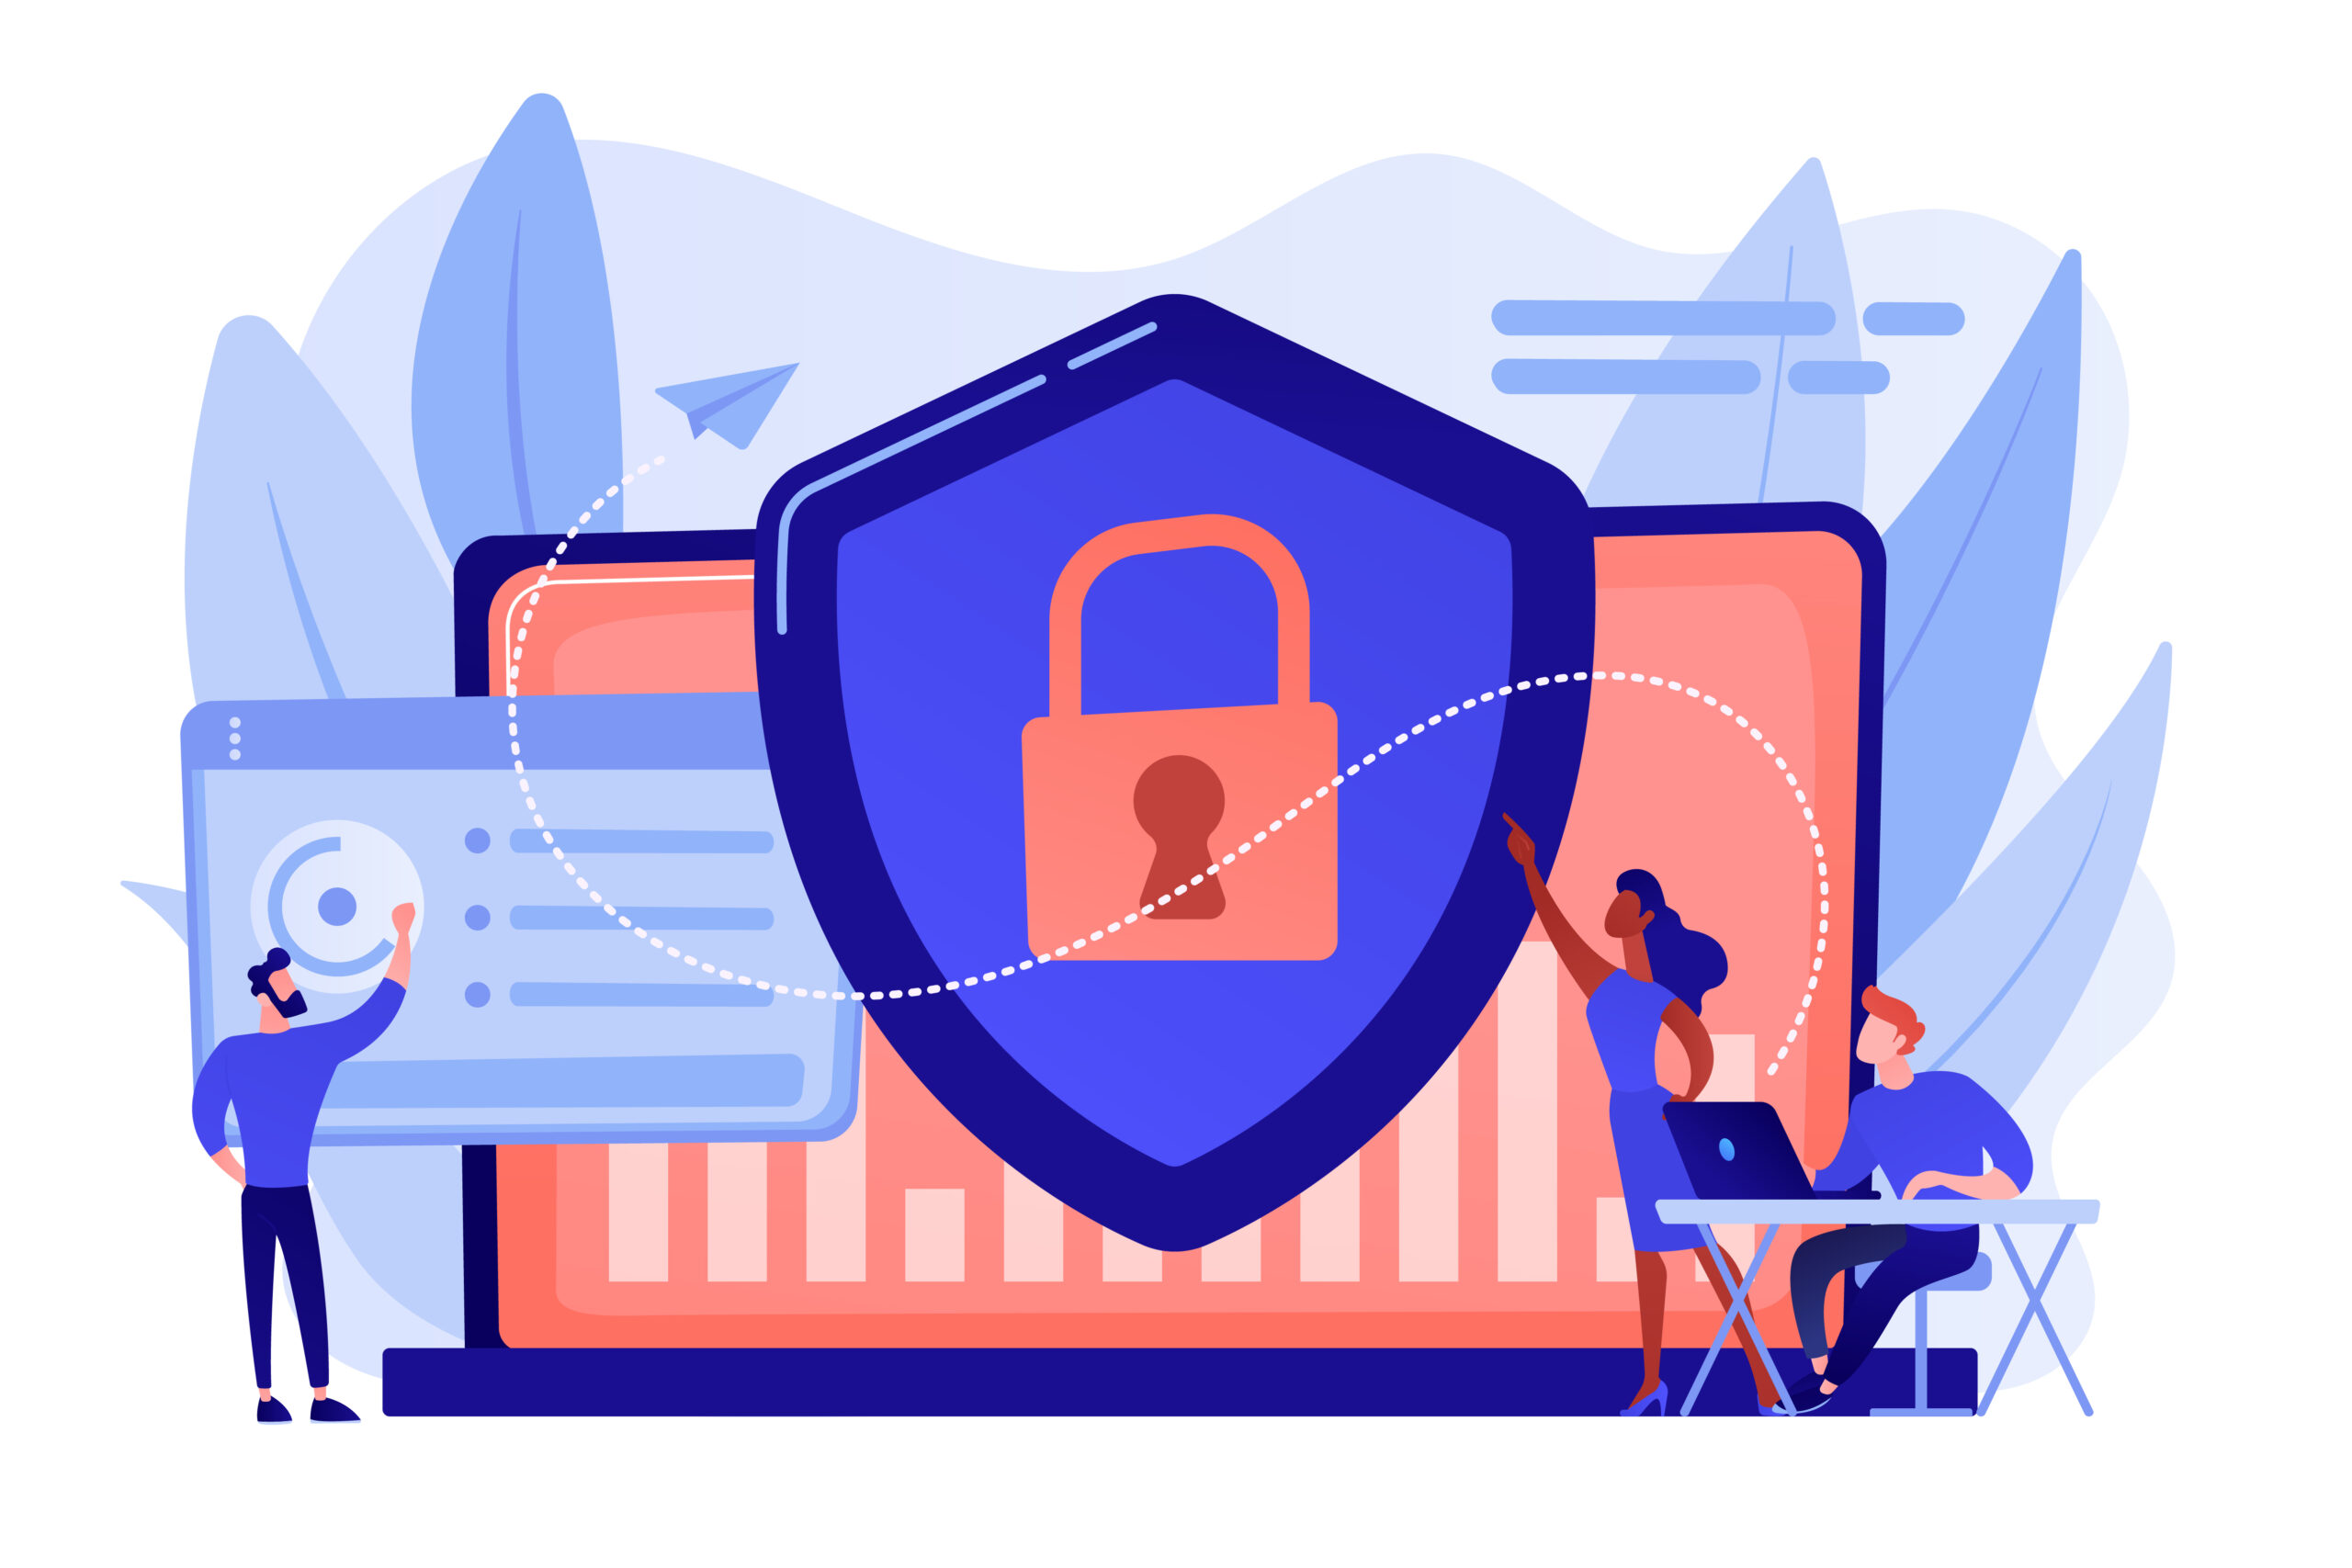 Leanmote’s data ethics & privacy: how we protect you